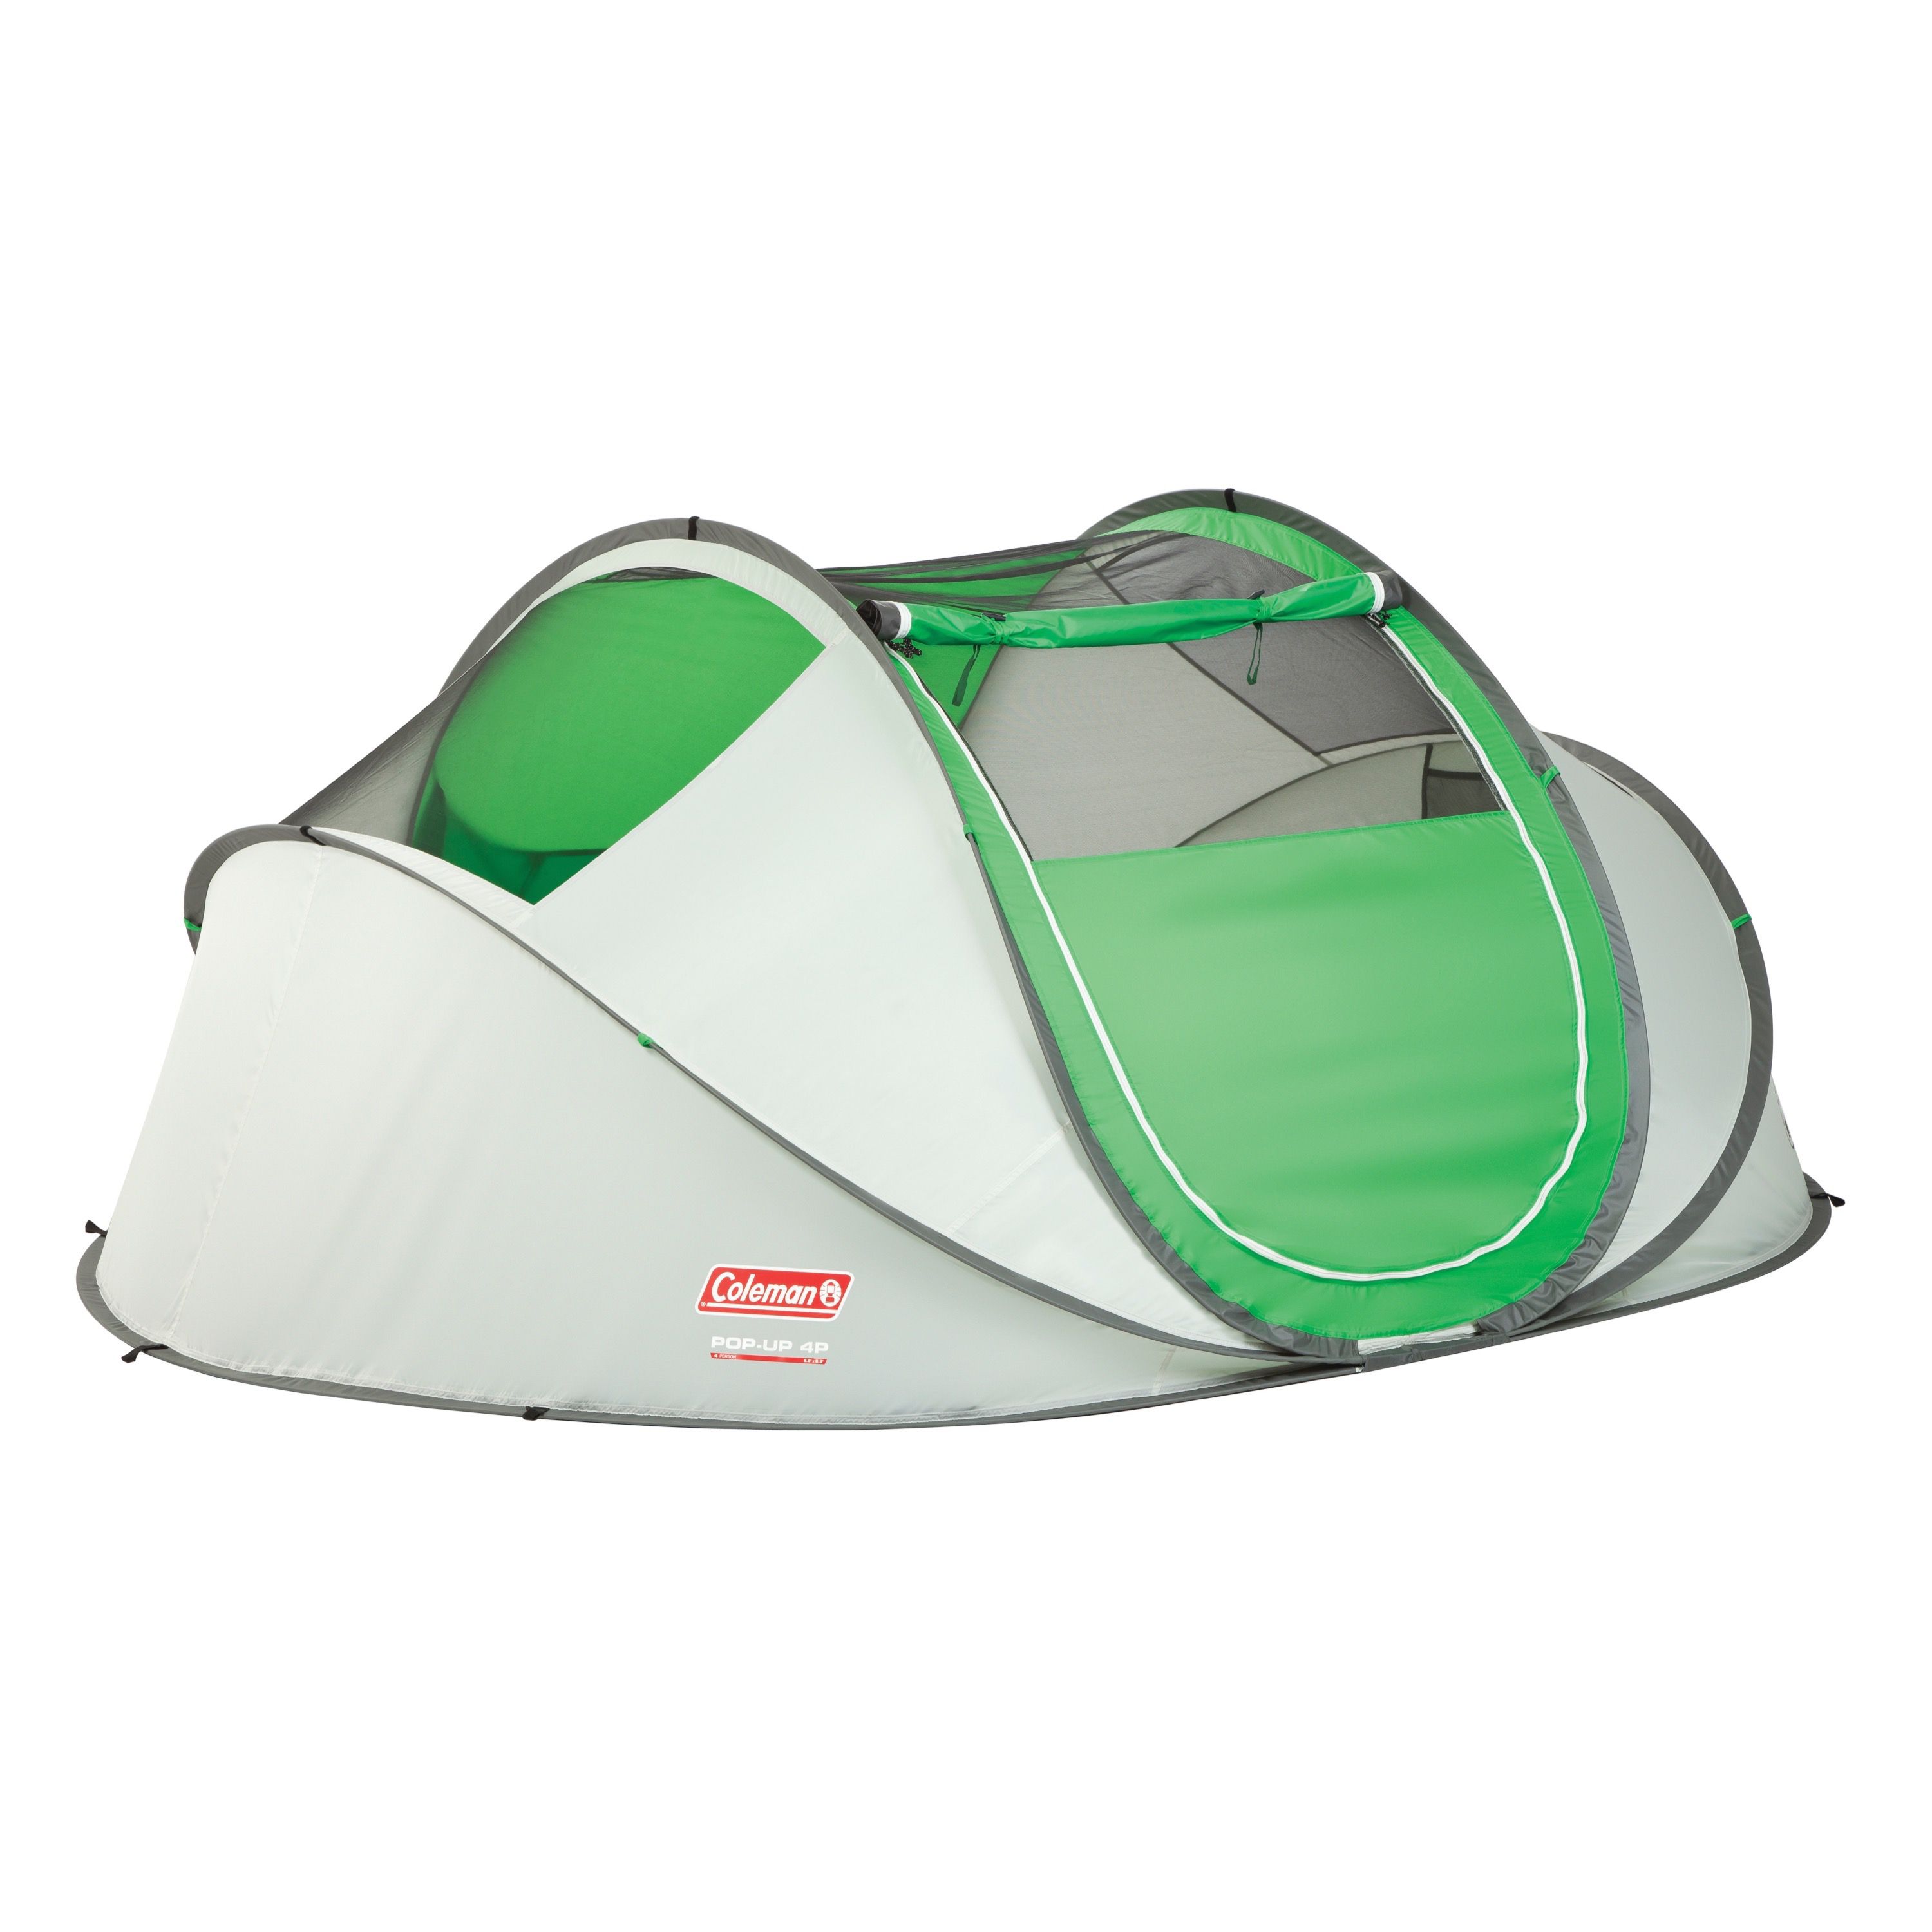 Coleman 4-Person Instant Pop-Up Tent 1 Room, Green - image 3 of 6